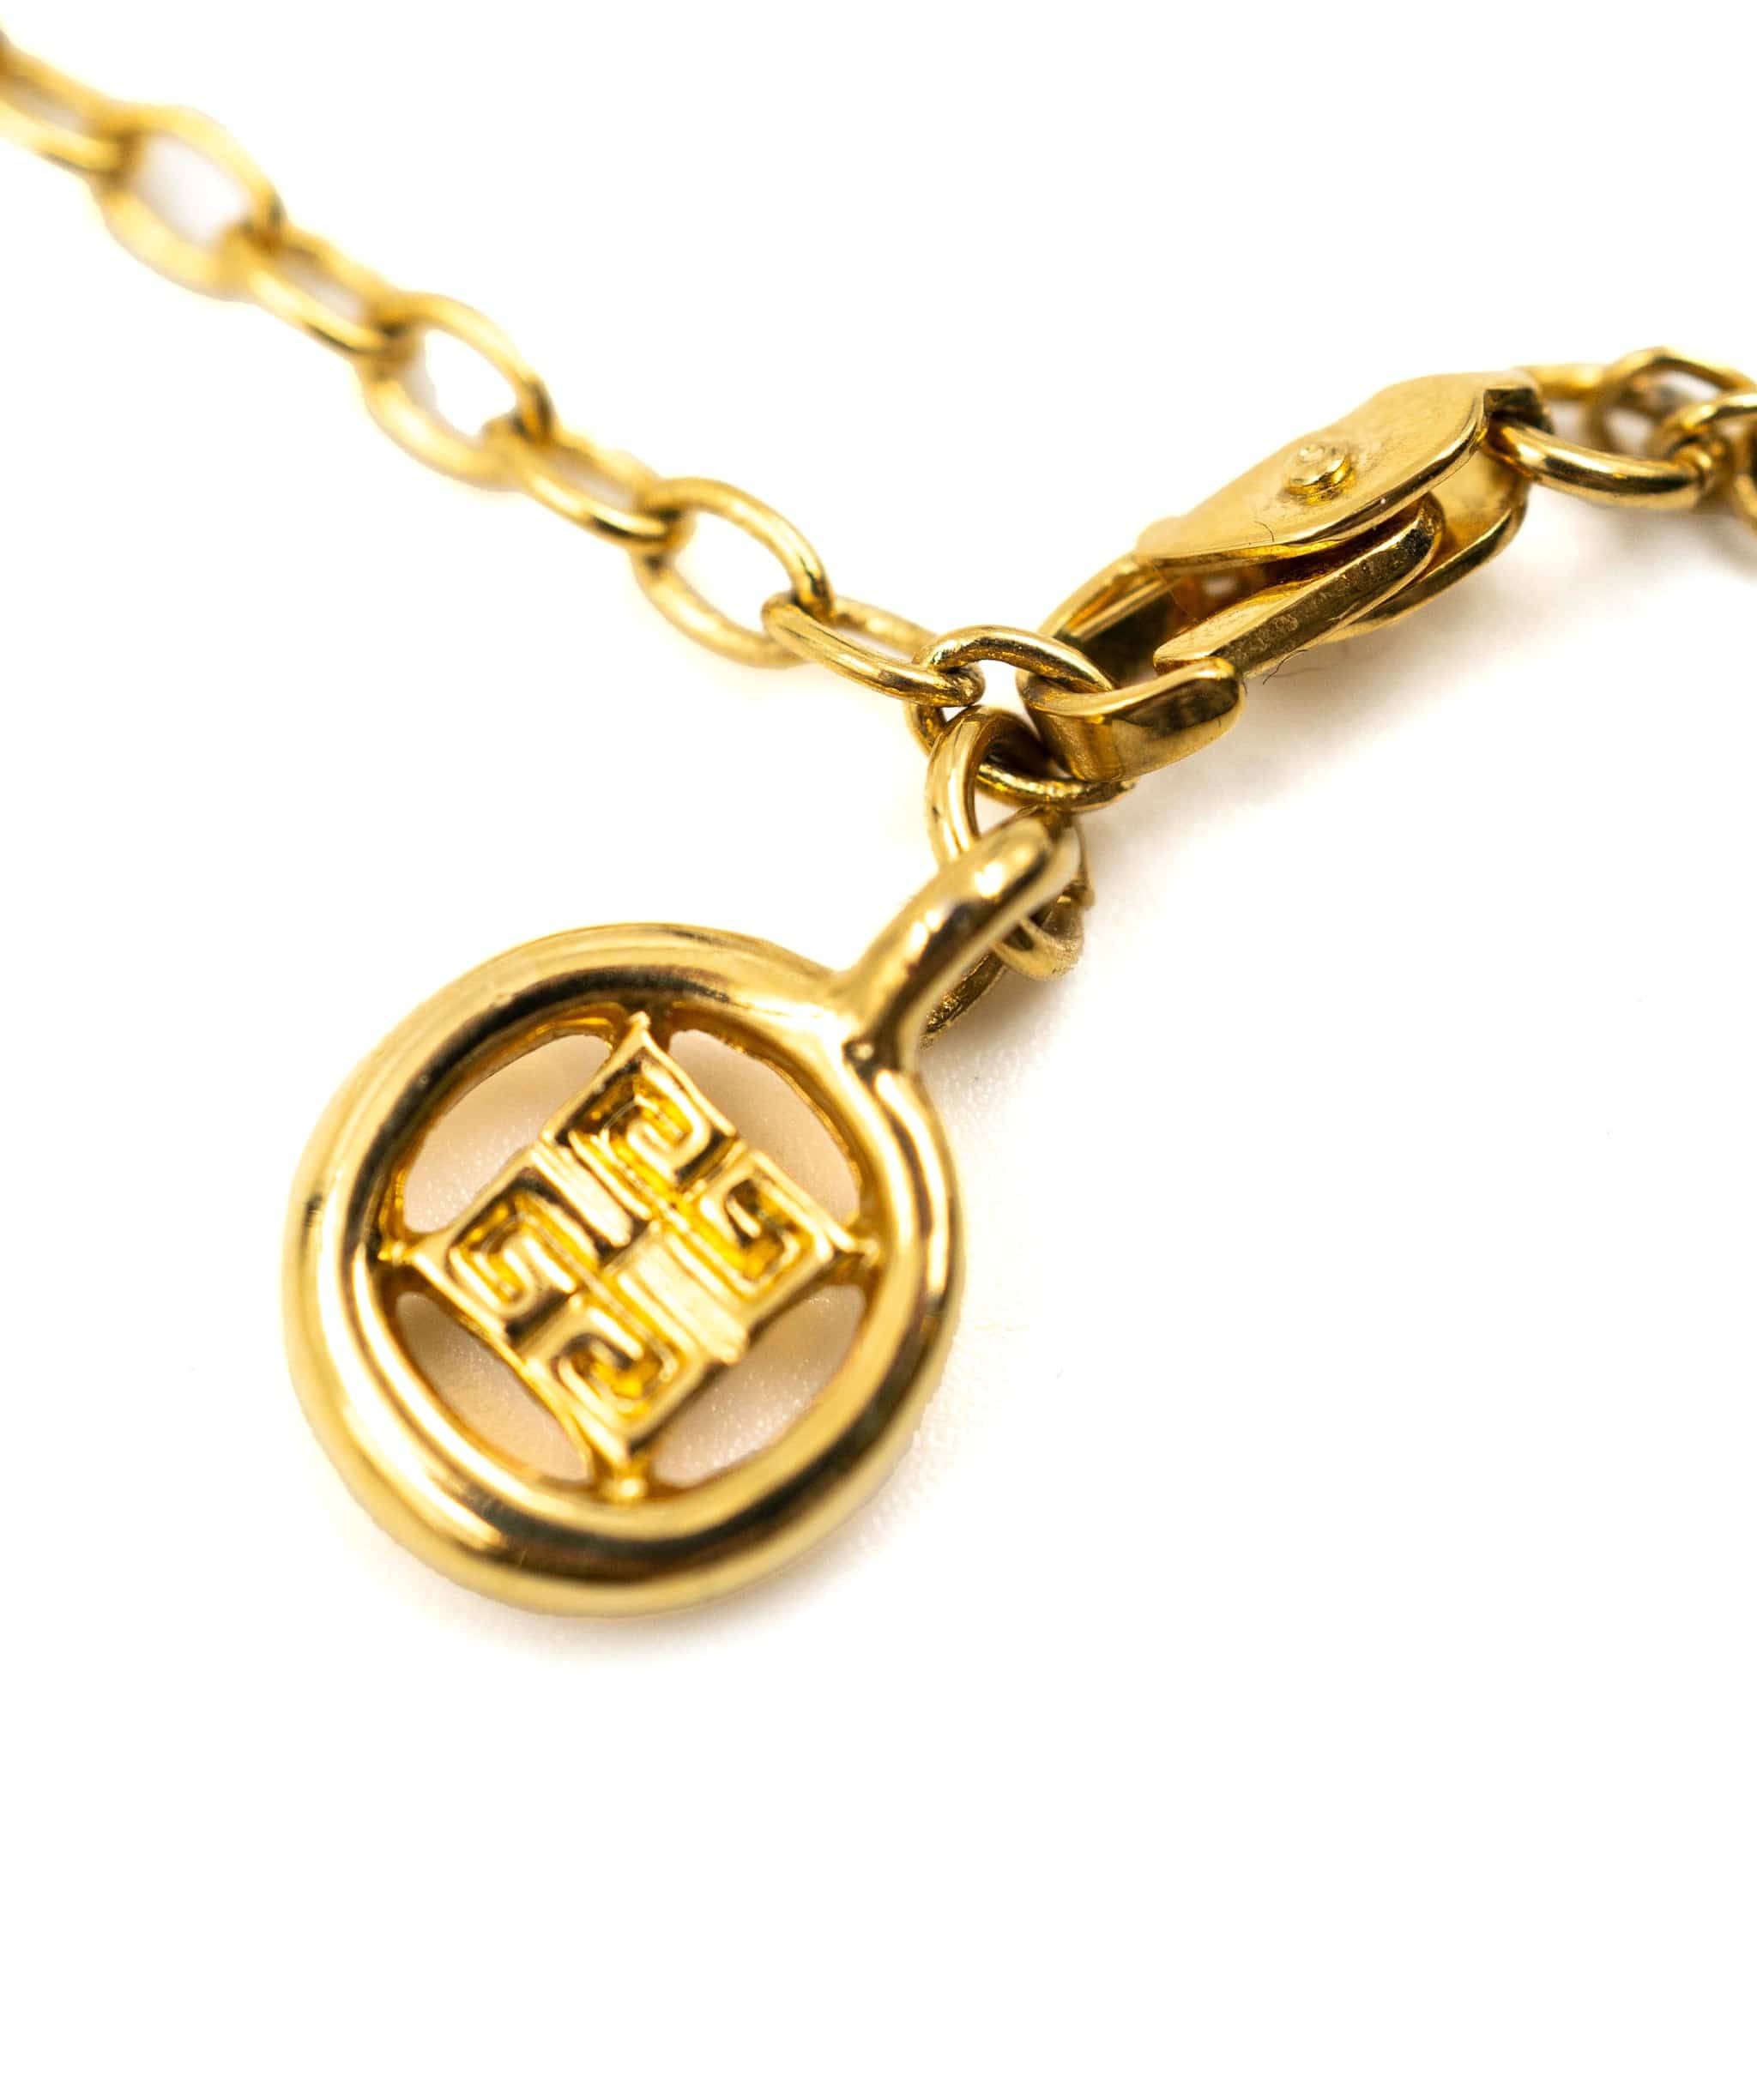 Givenchy Givenchy Vintage Letter PARIS Charm Necklace - AWL3621